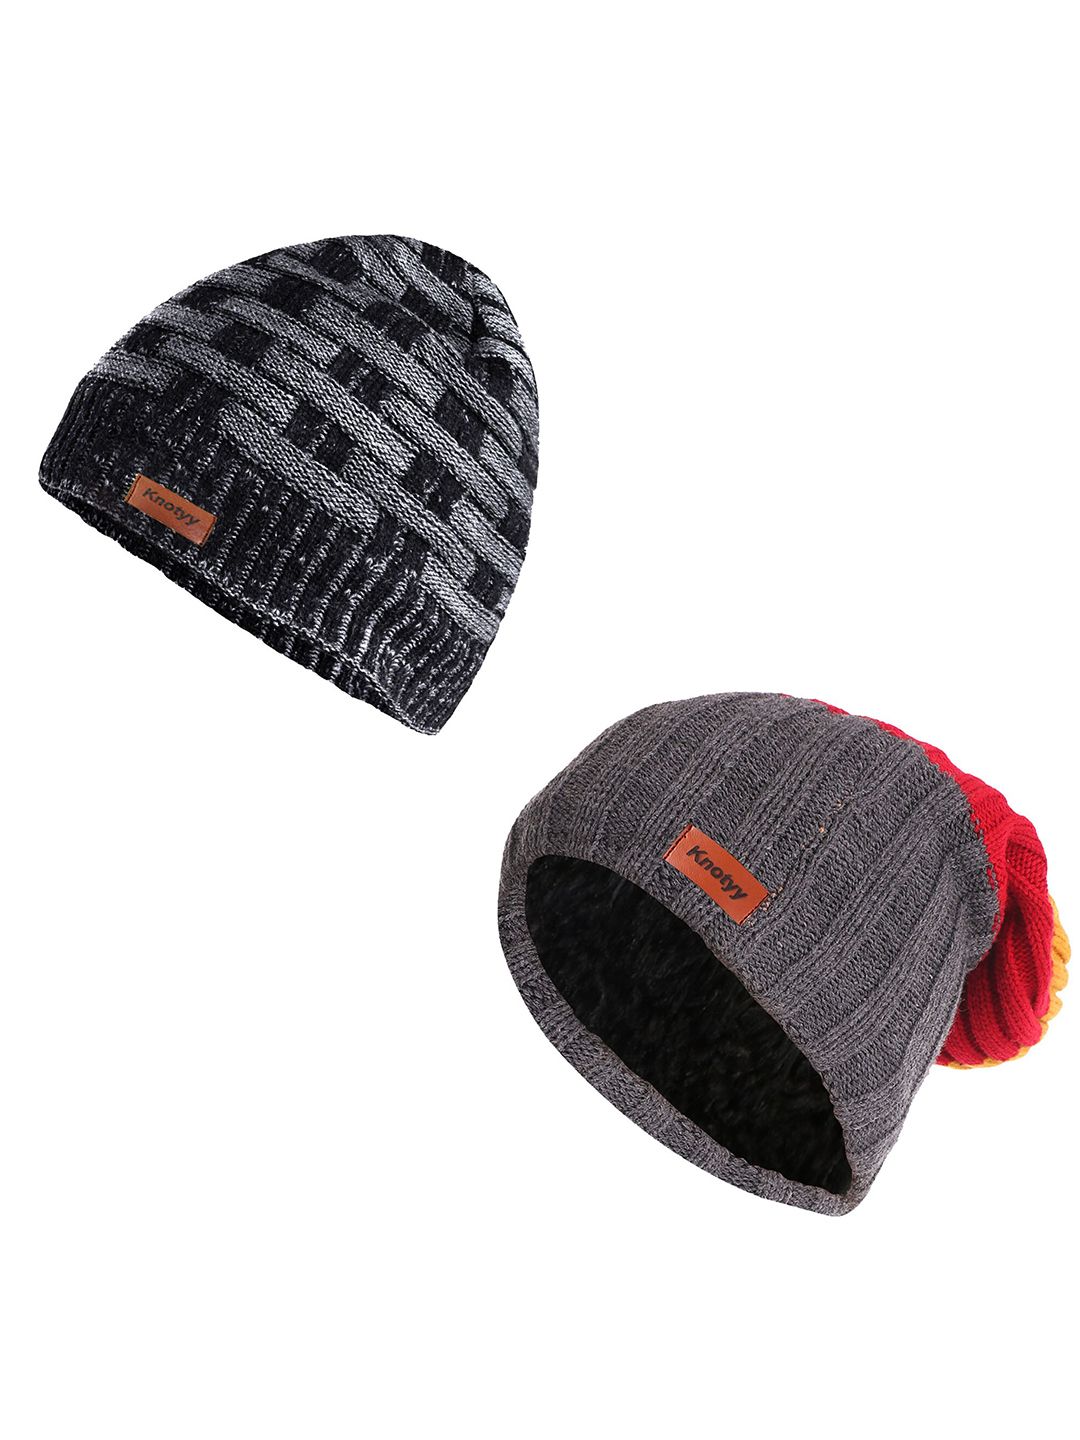 Knotyy Unisex Pack of 2 Acrylic Beanie Price in India